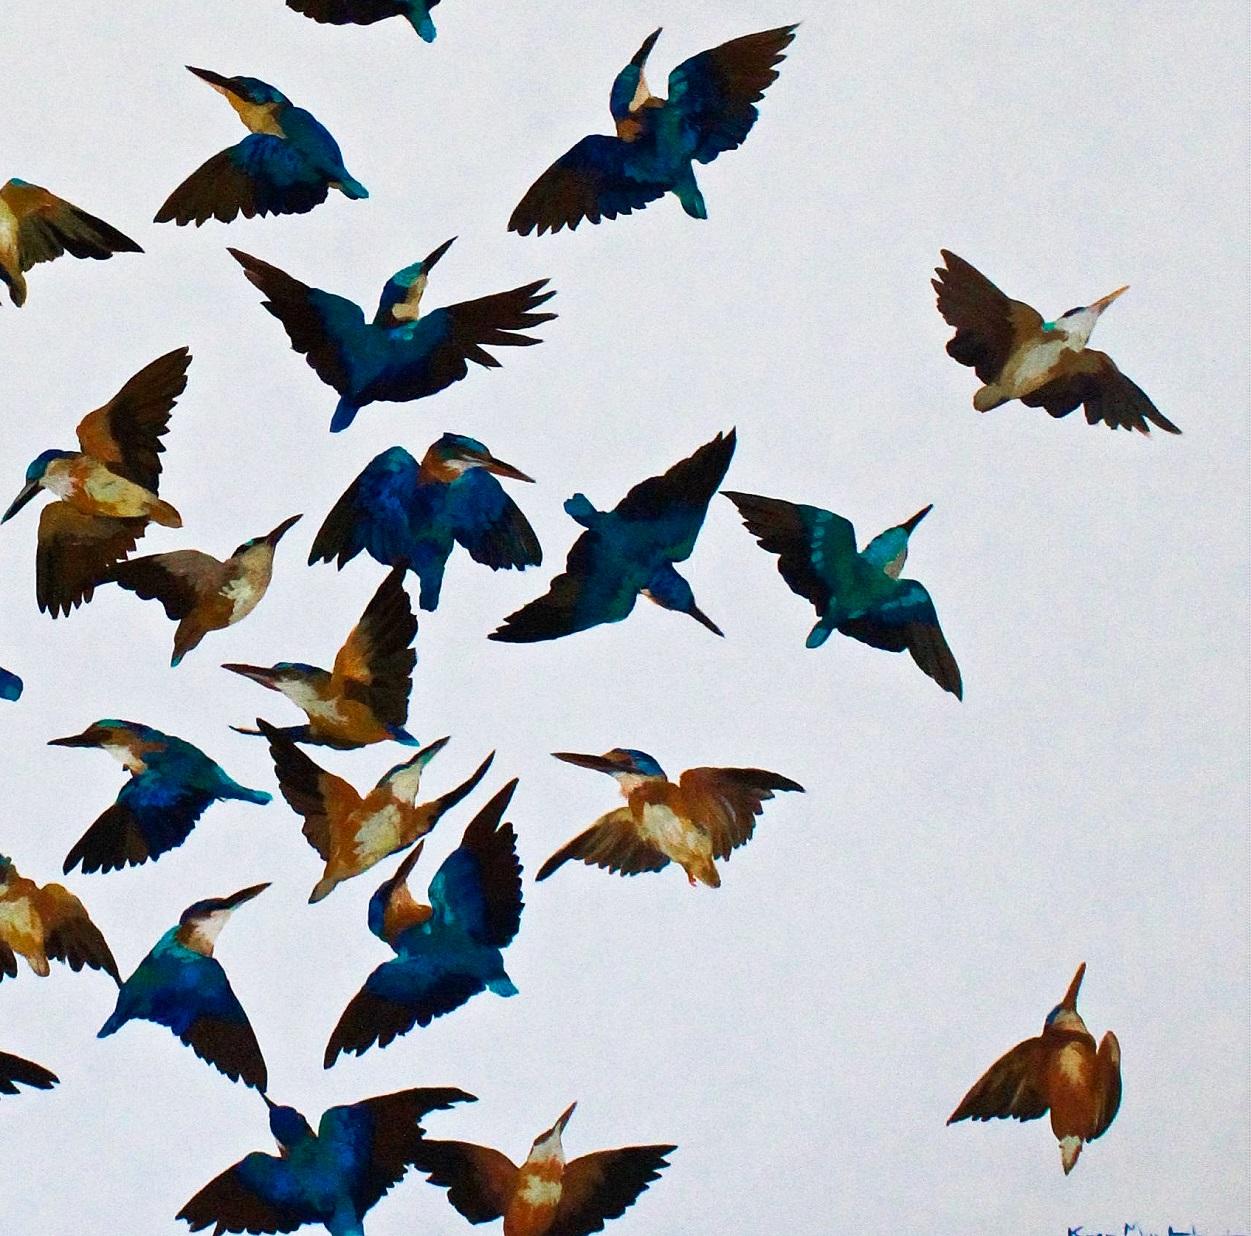 Kingfishers - Contemporary, Acrylic on canvas laid on board, 21st Century - Painting by Kirsty May Hall